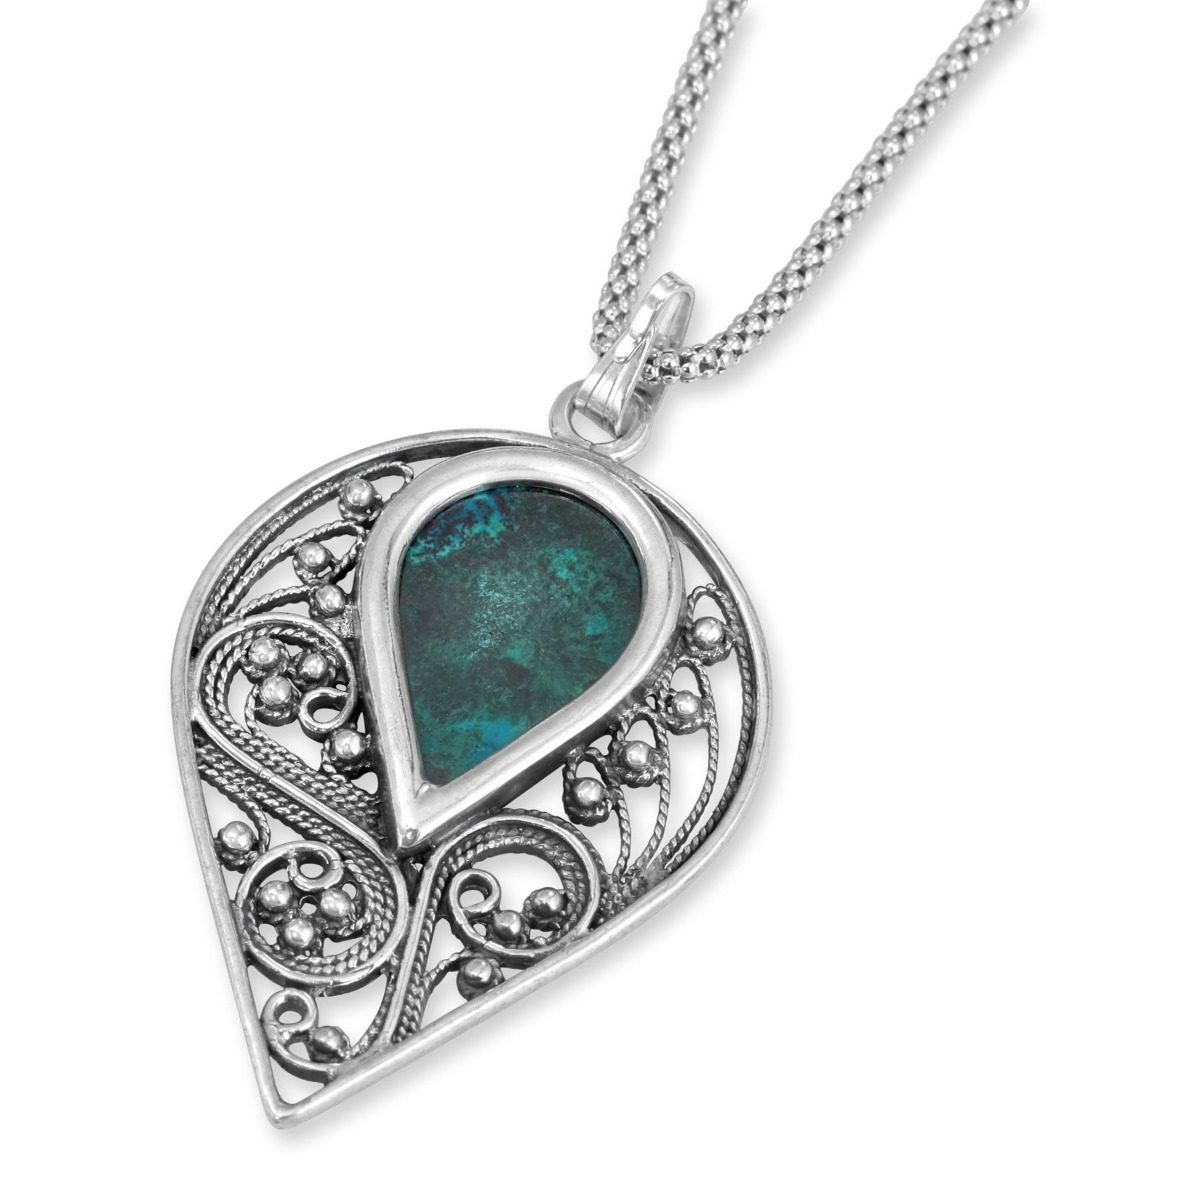 Rafael Jewelry Sterling Silver and Eilat Stone Filigree Necklace - 1